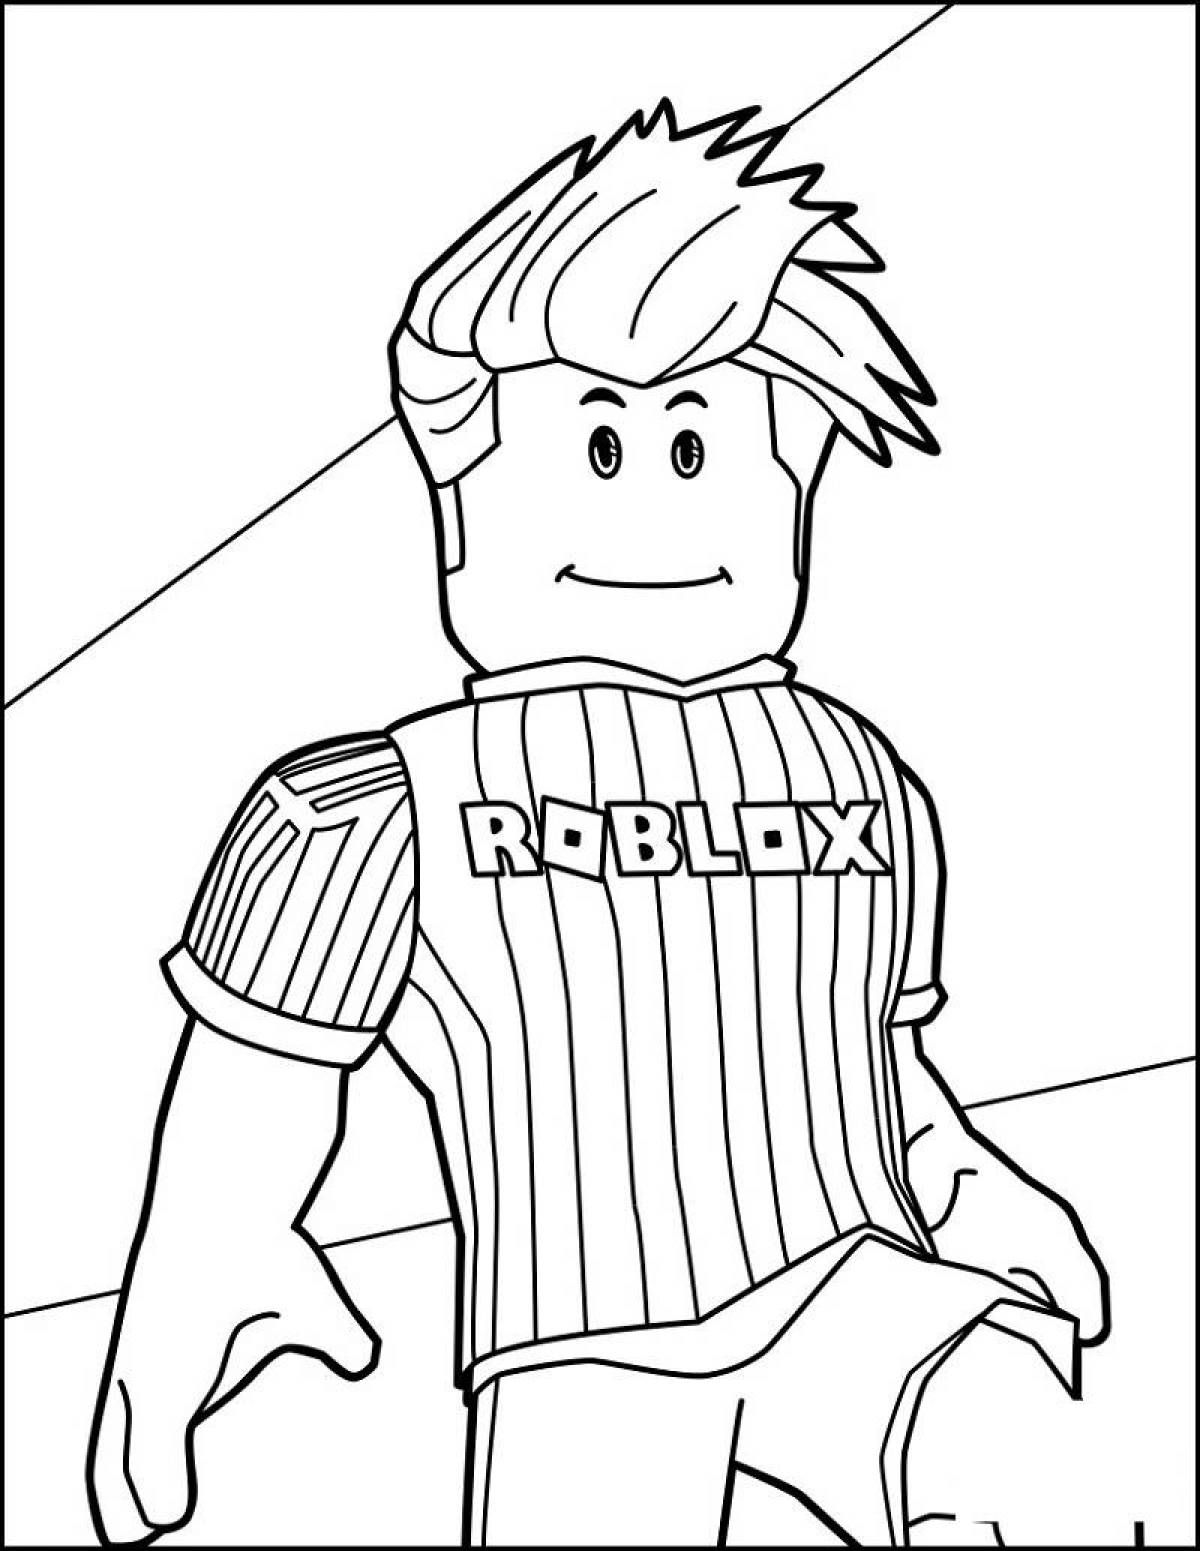 Roblox wonderful coloring book for boys